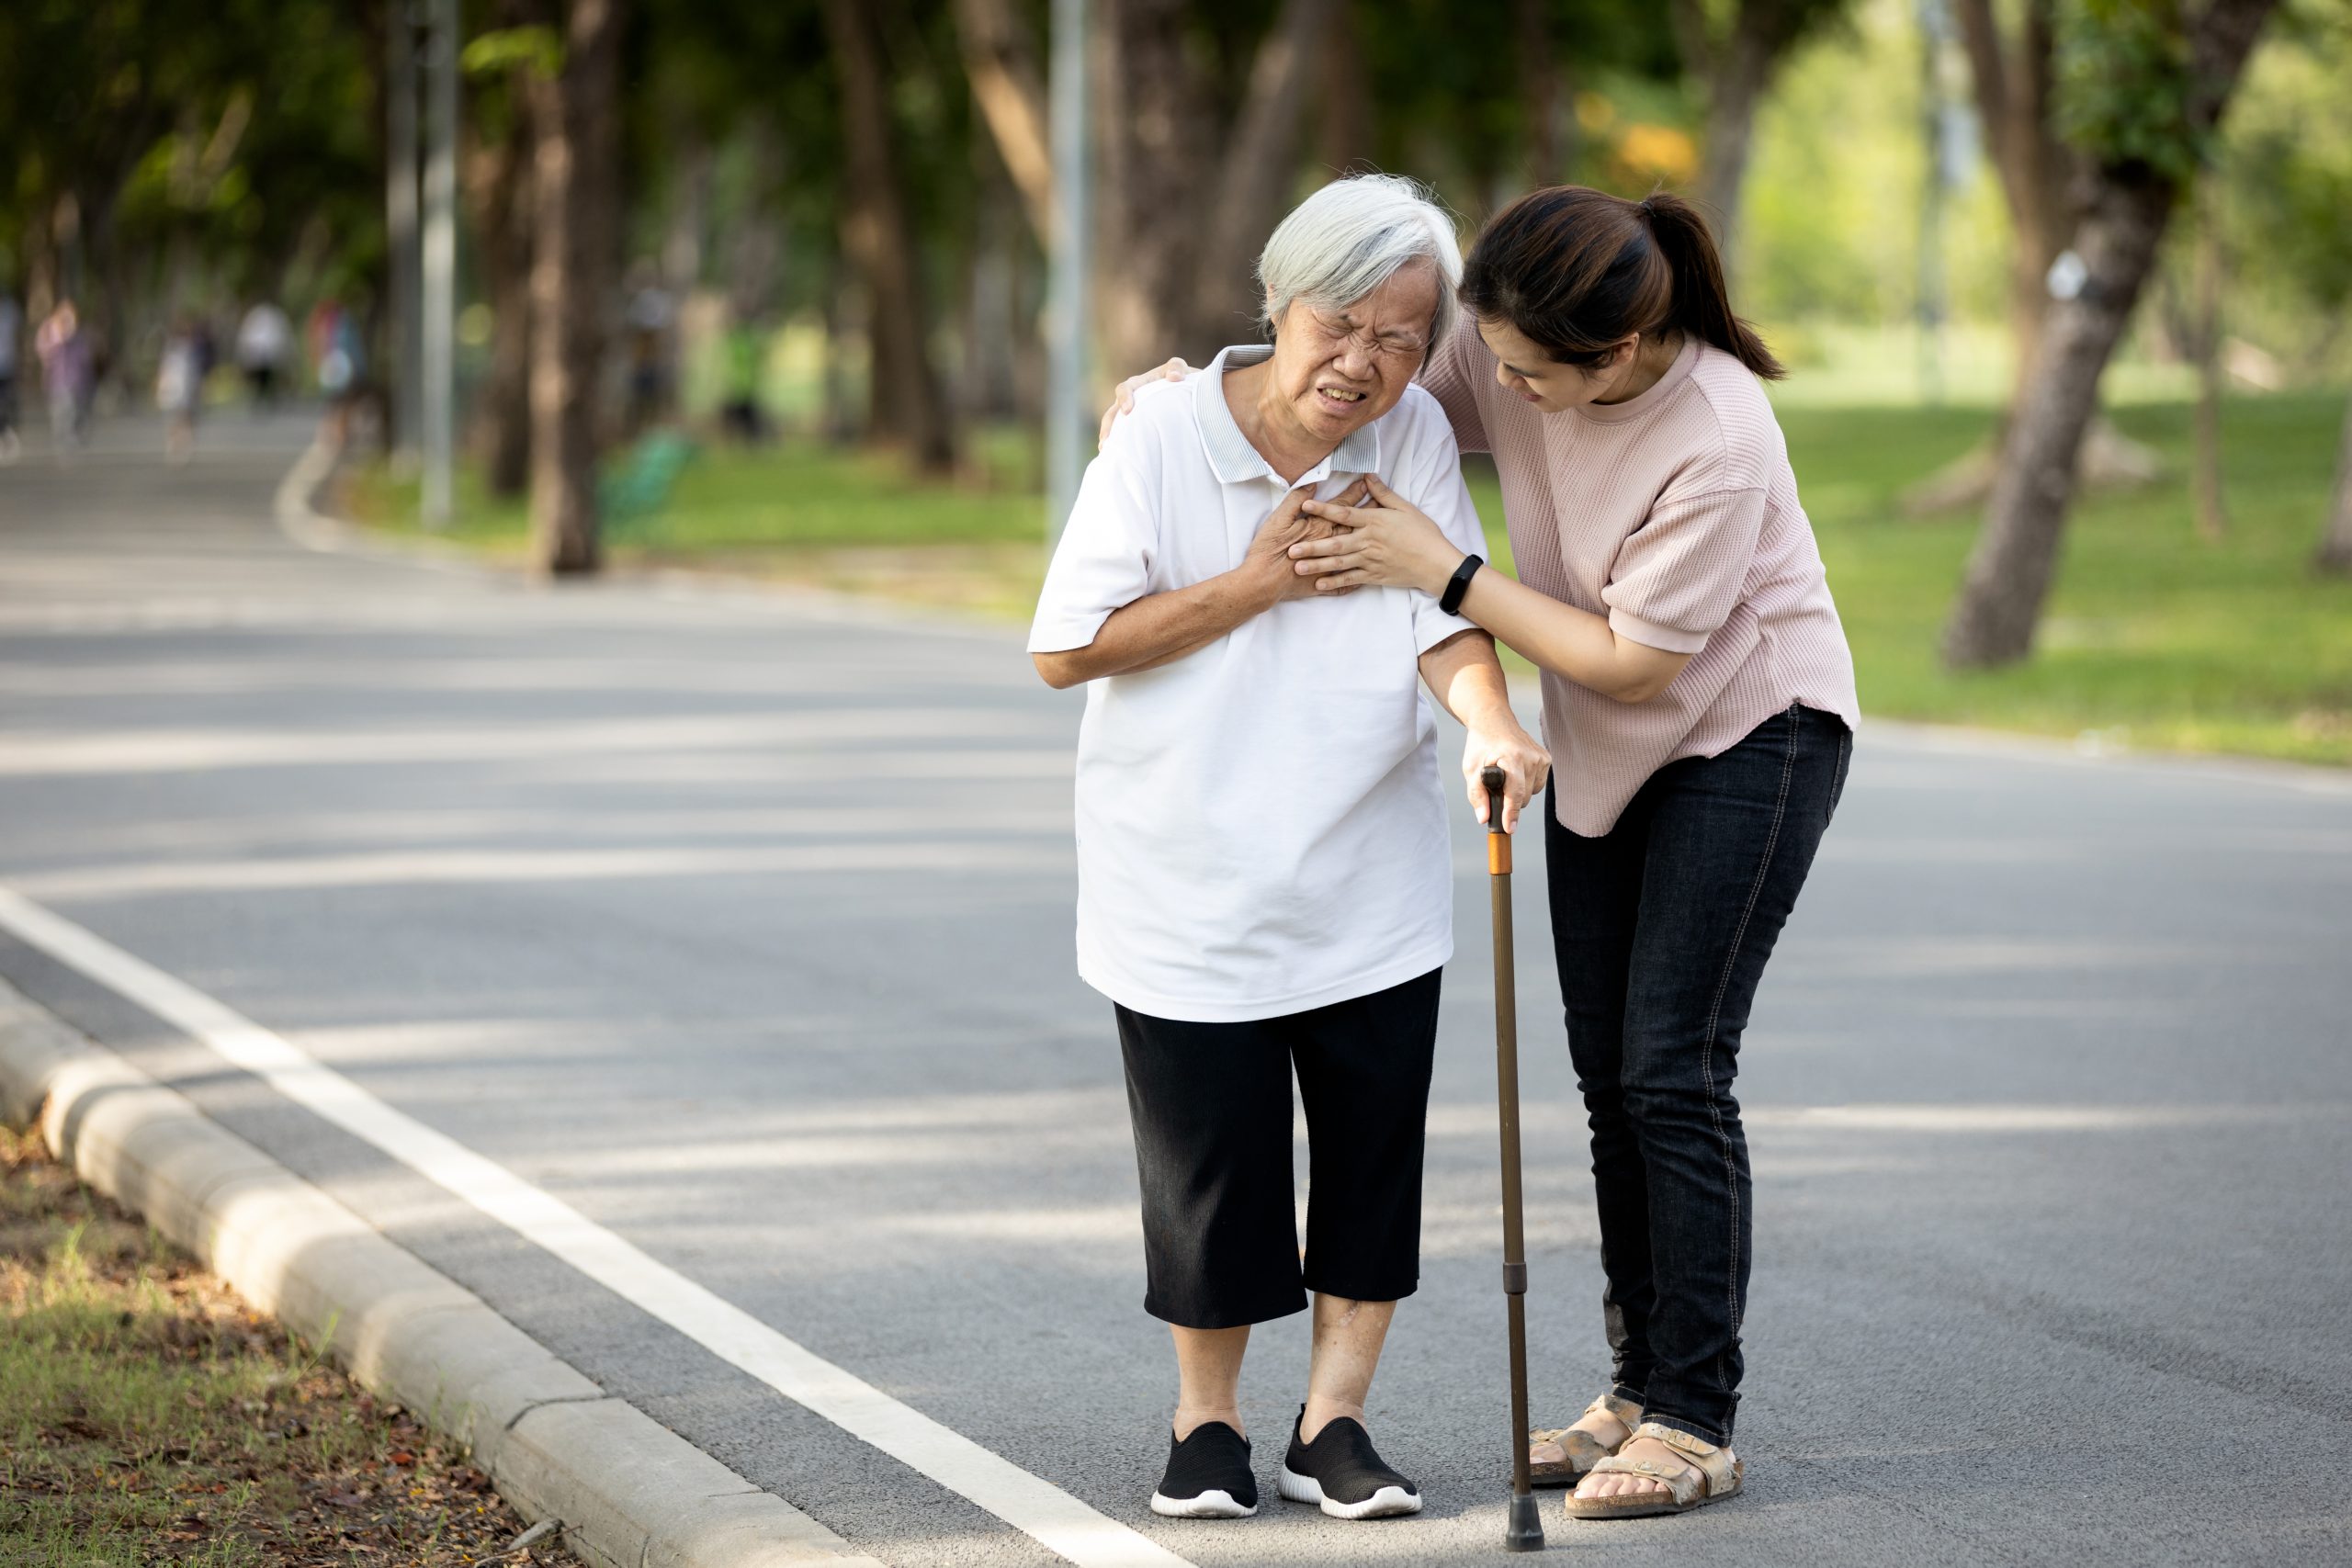 Image of elderly woman in distress, while walking with caregiver